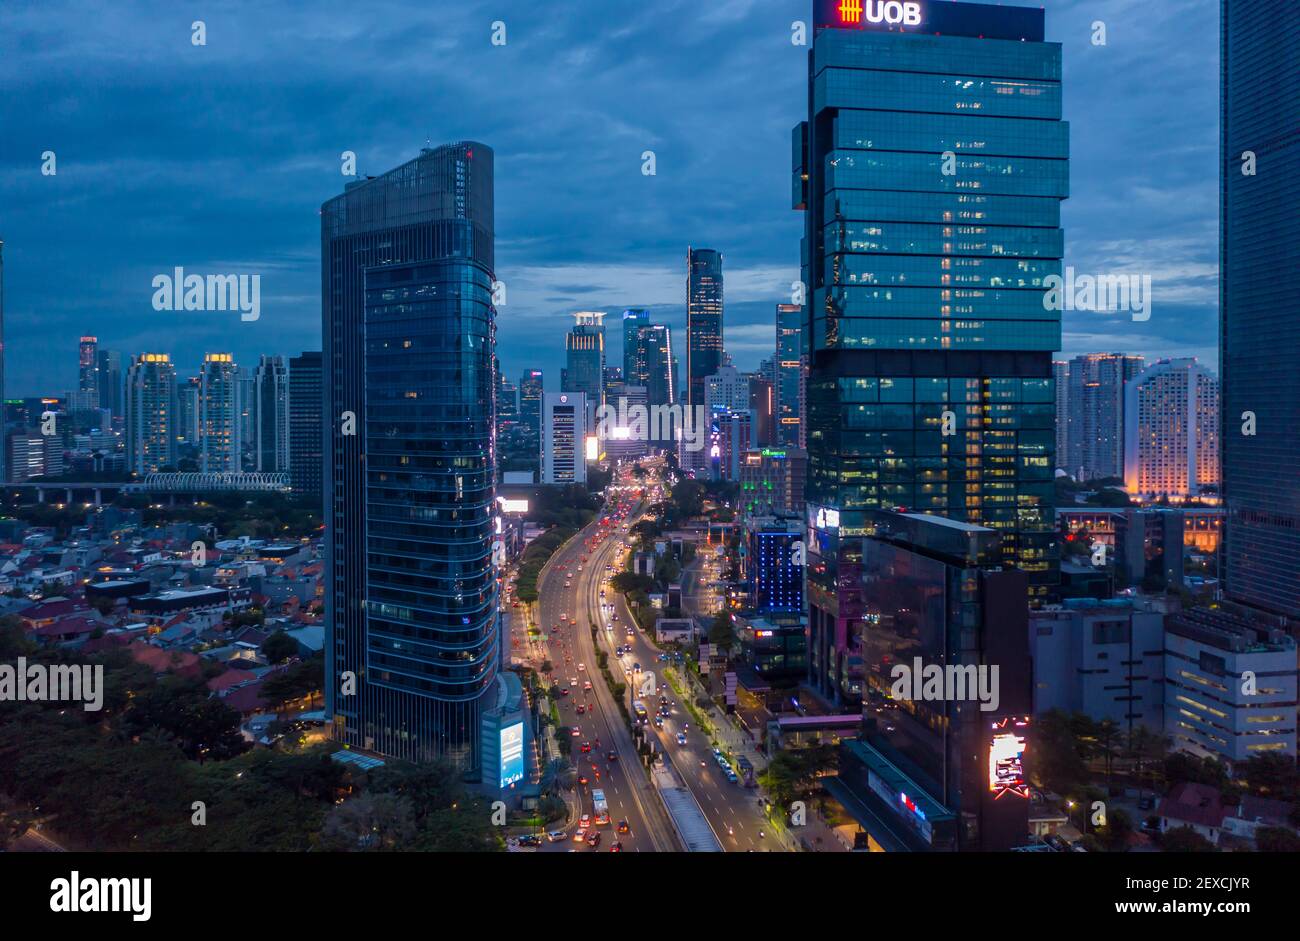 Aerial view of multi lane highway through modern city center with tall skyscrapers in blue evening light Night time traffic through downtown Jakarta, Indonesia Stock Photo